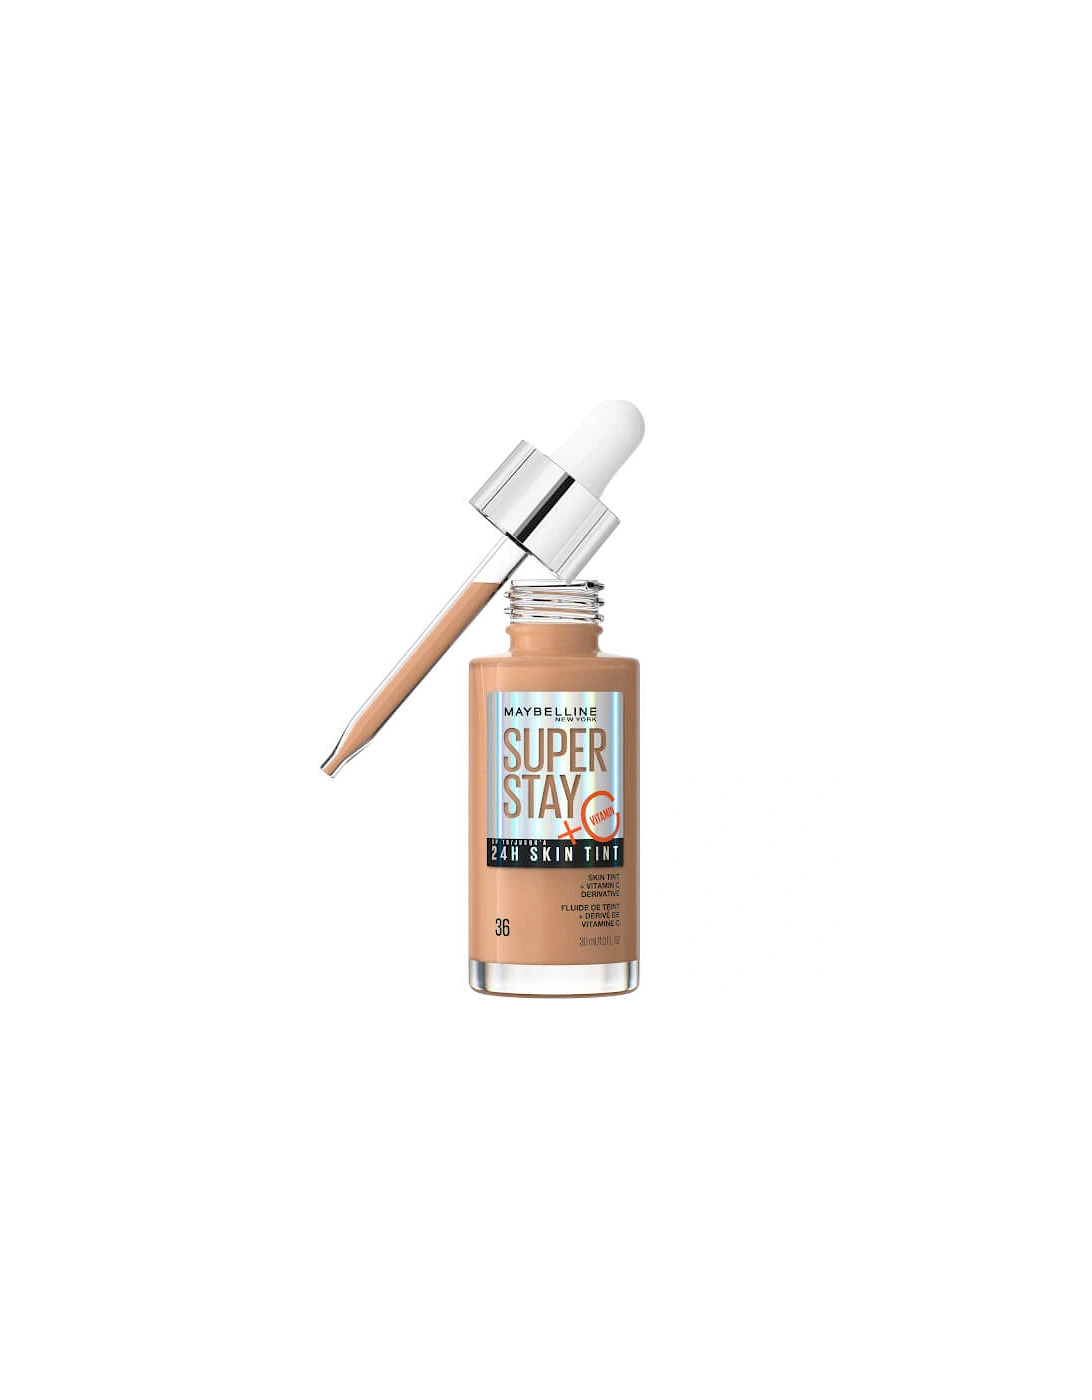 Super Stay up to 24H Skin Tint Foundation + Vitamin C - Shade 36, 2 of 1